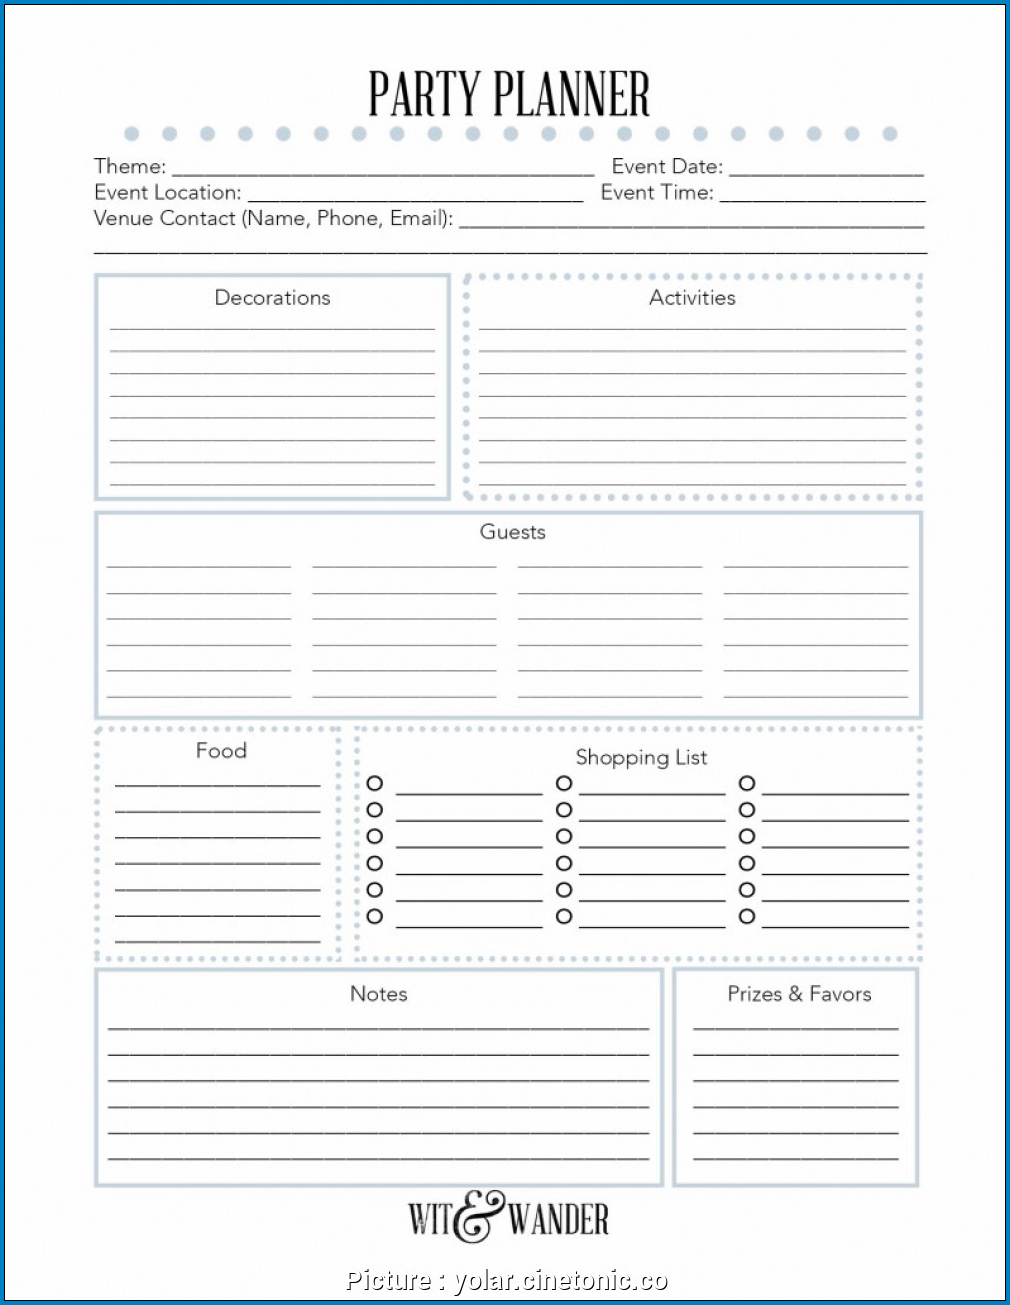 Example of Party Planner Checklist Template